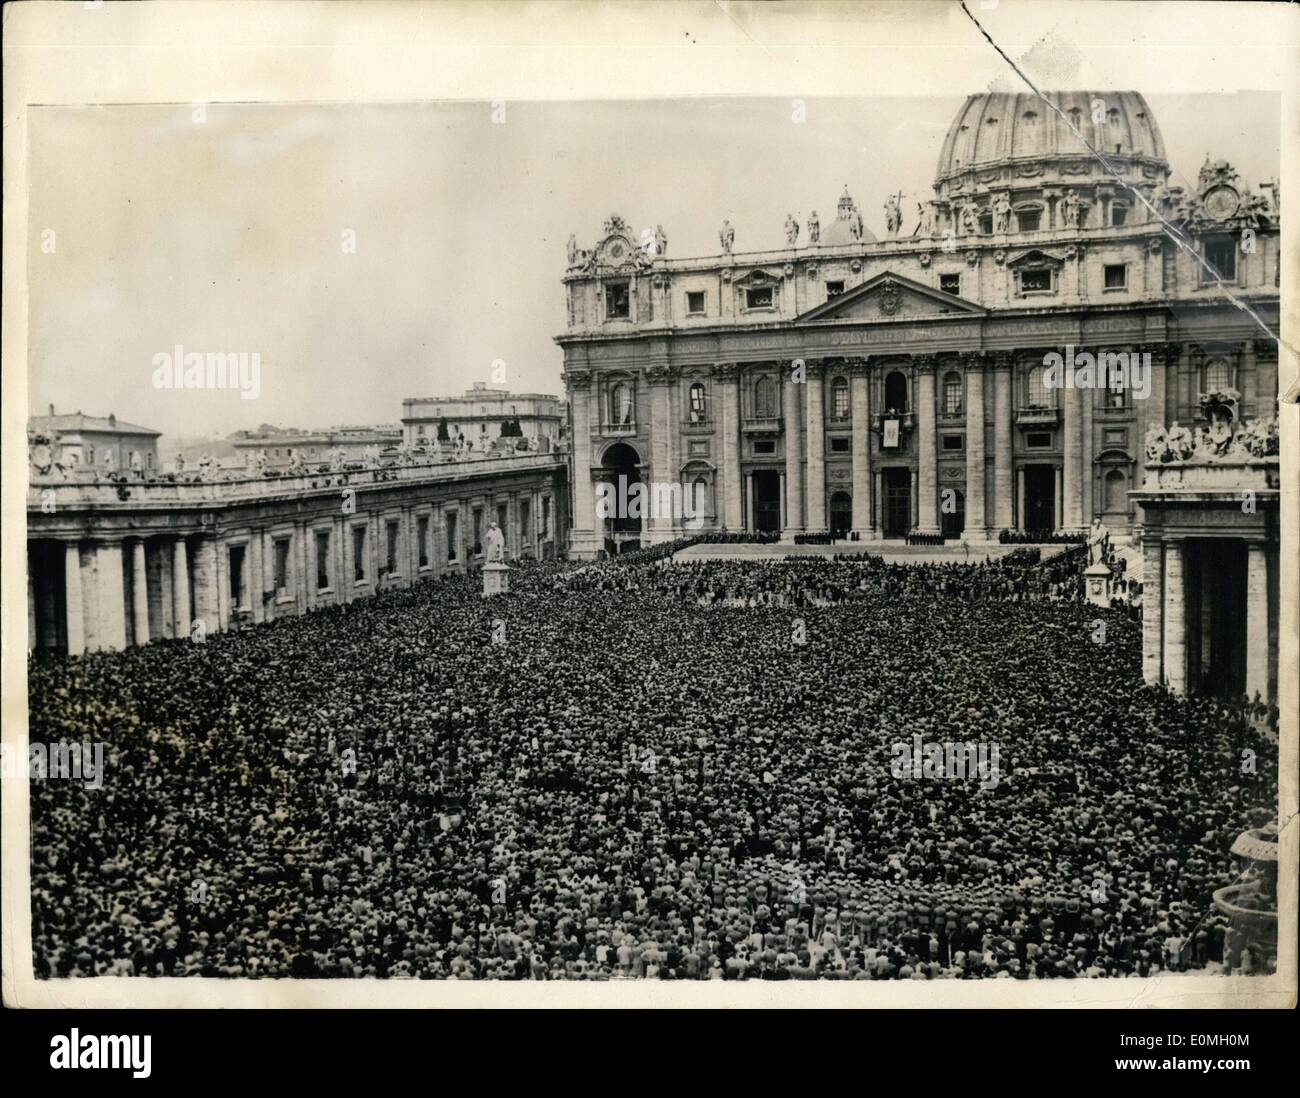 Apr. 04, 1955 - Pope Gives Easter Blessing to World. Standing on the Central balcony of the Basilica of St. Peter's, with more than 100,000 poeple gathered below in St. Peter's Square, Rome, The Pope gave his message of peace to the peoples of the world, and the Apolostic benediction of ''Urbi et Orby'' (Italy and the World), to the kneeling thousands. Photo Shows: General view of the scene in St. Peter's Square, rome, showing The Pope delivering his speech and benediction from the central balcony of the Basilica of St. Peter's, Rome. Stock Photo